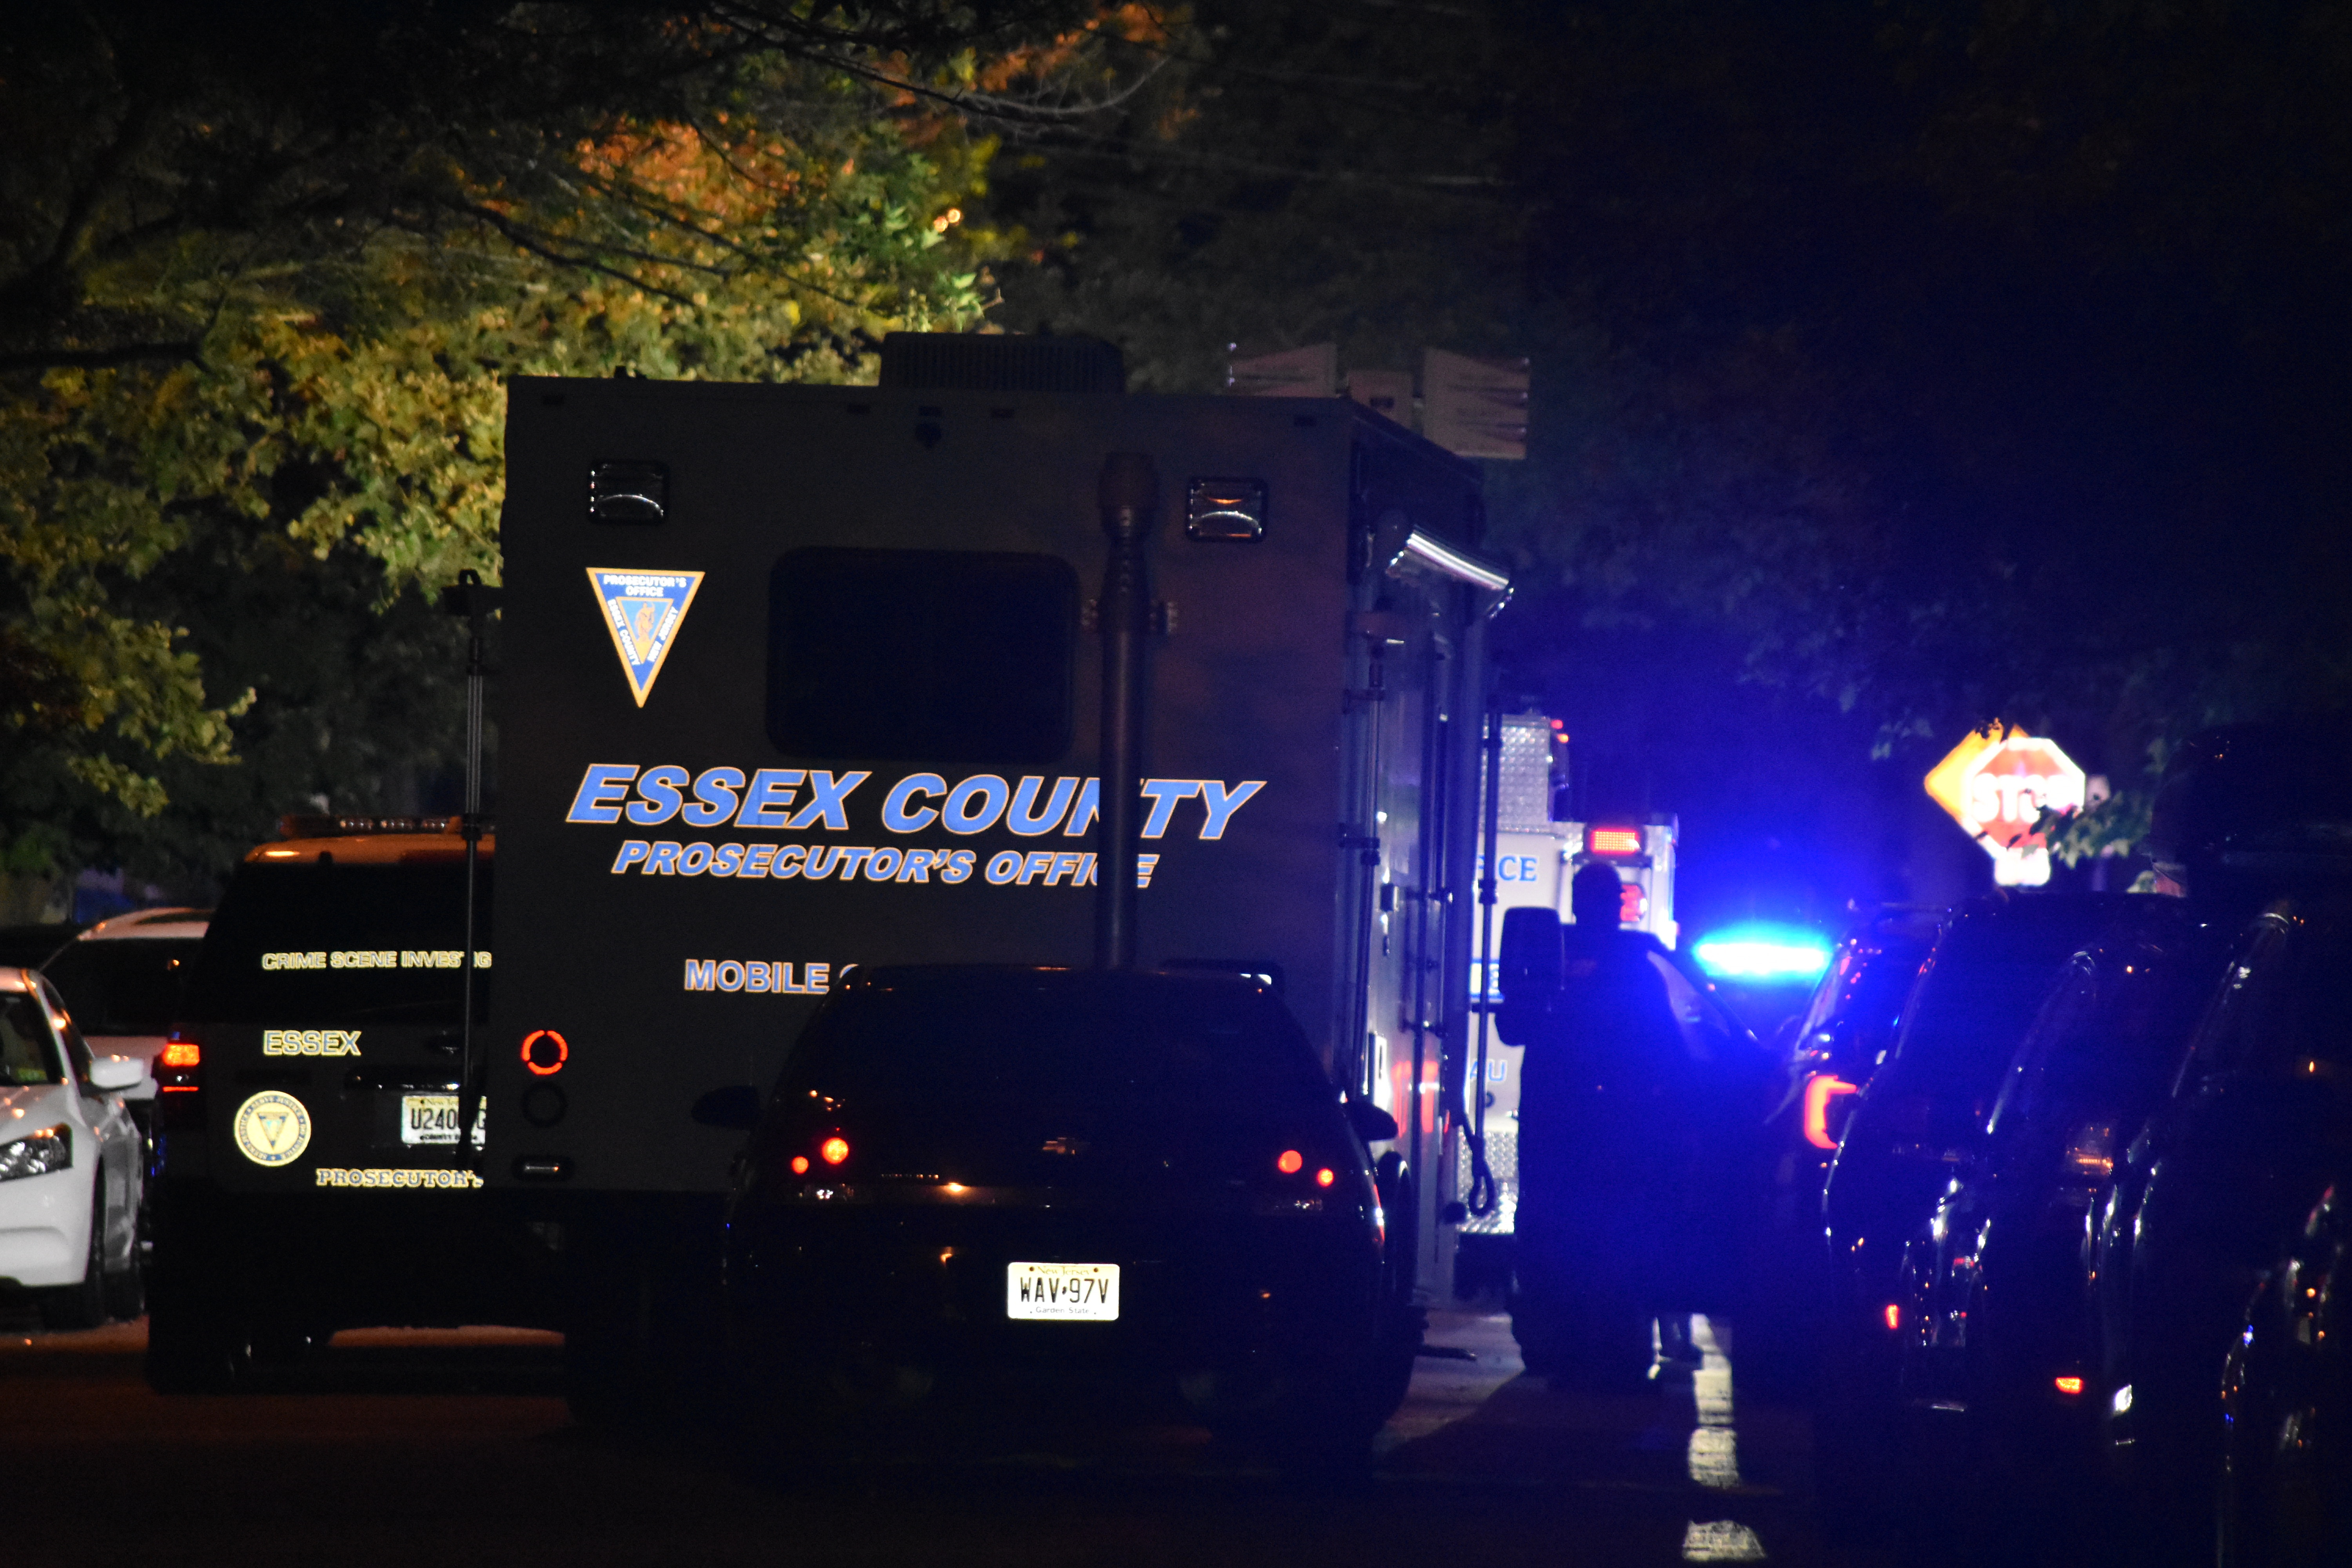 Police vehicles with their emergency lights on at night respond to a crime in Newark.